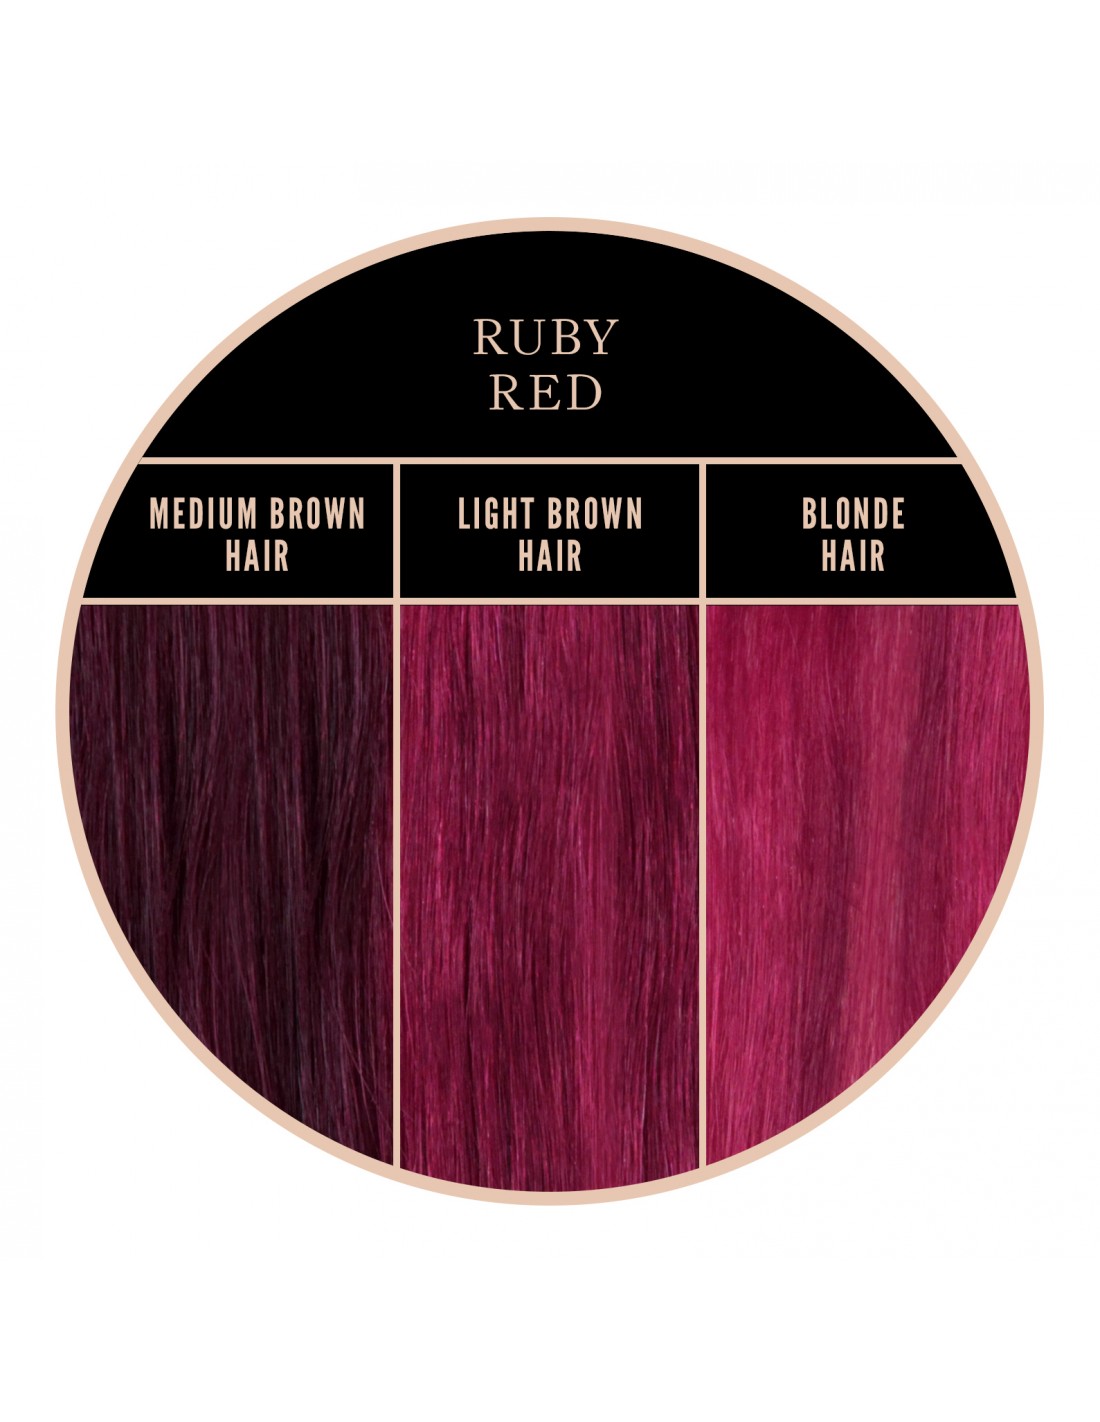 Herman's Amazing Hair Color - Ruby Red